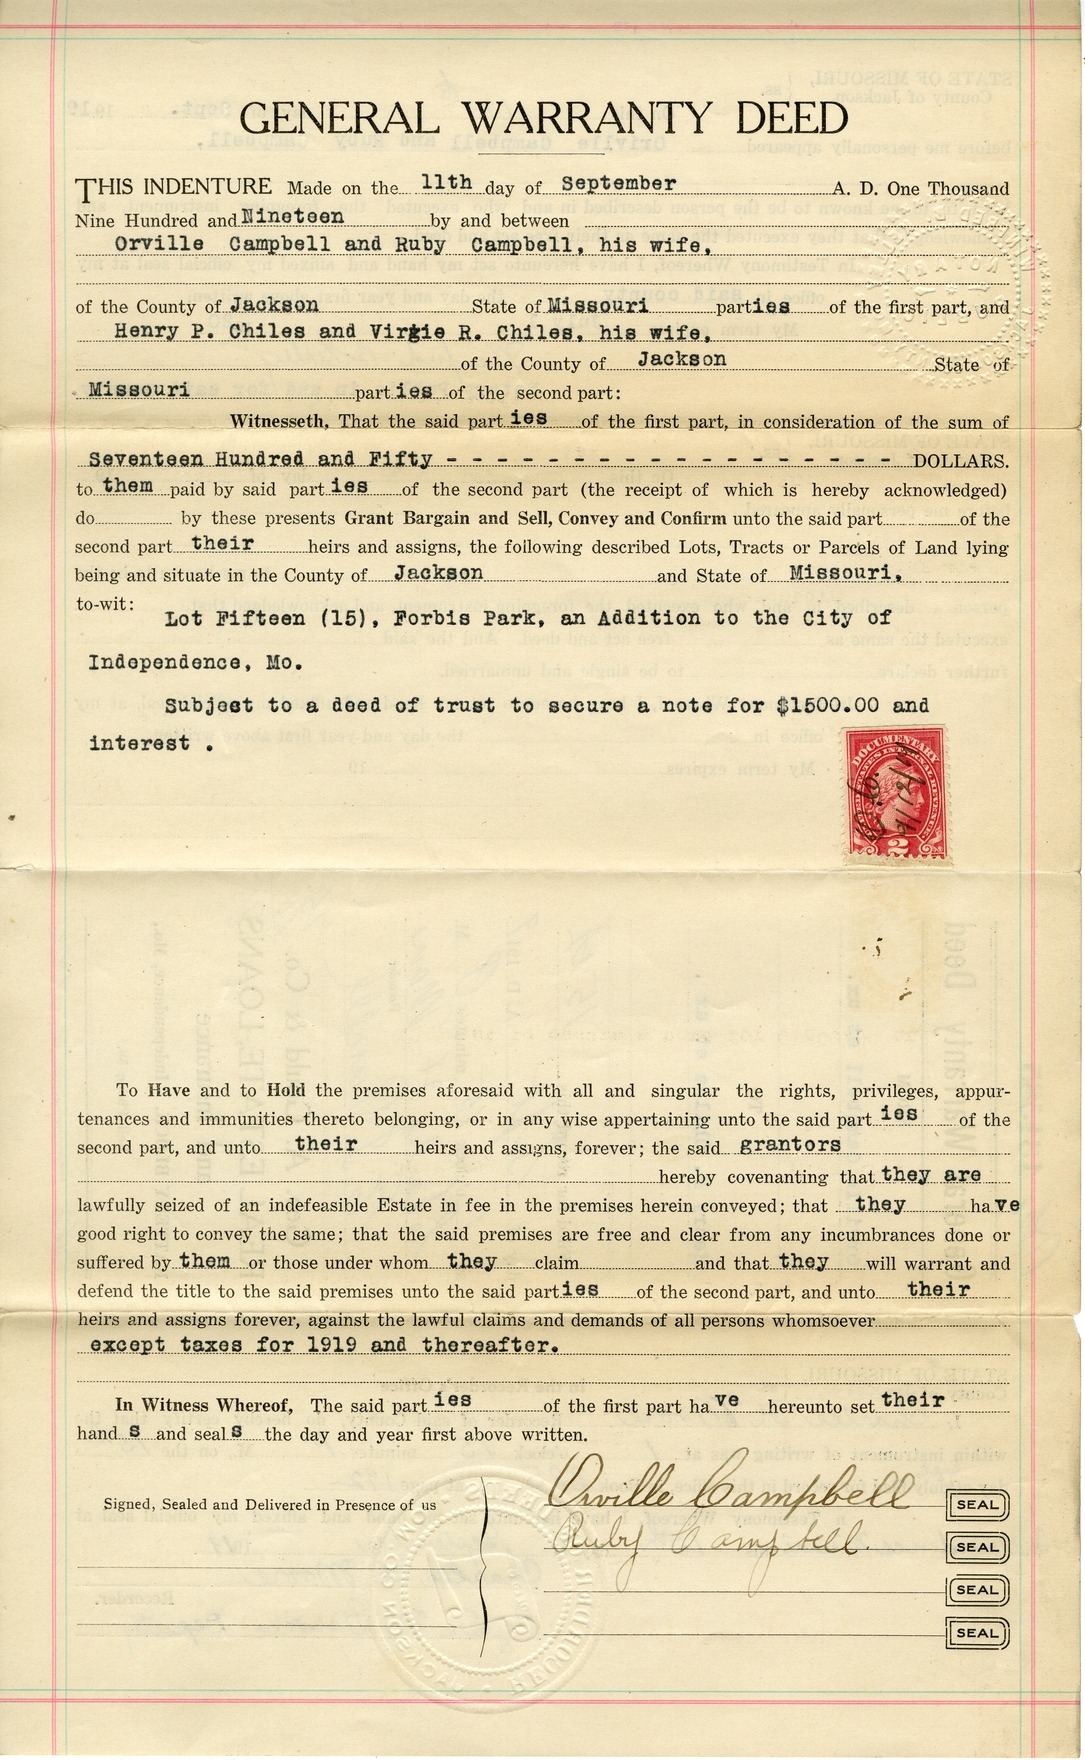 General Warranty Deed from Orville Campbell and Ruby Campbell to Henry P. Chiles and Virgie R. Chiles